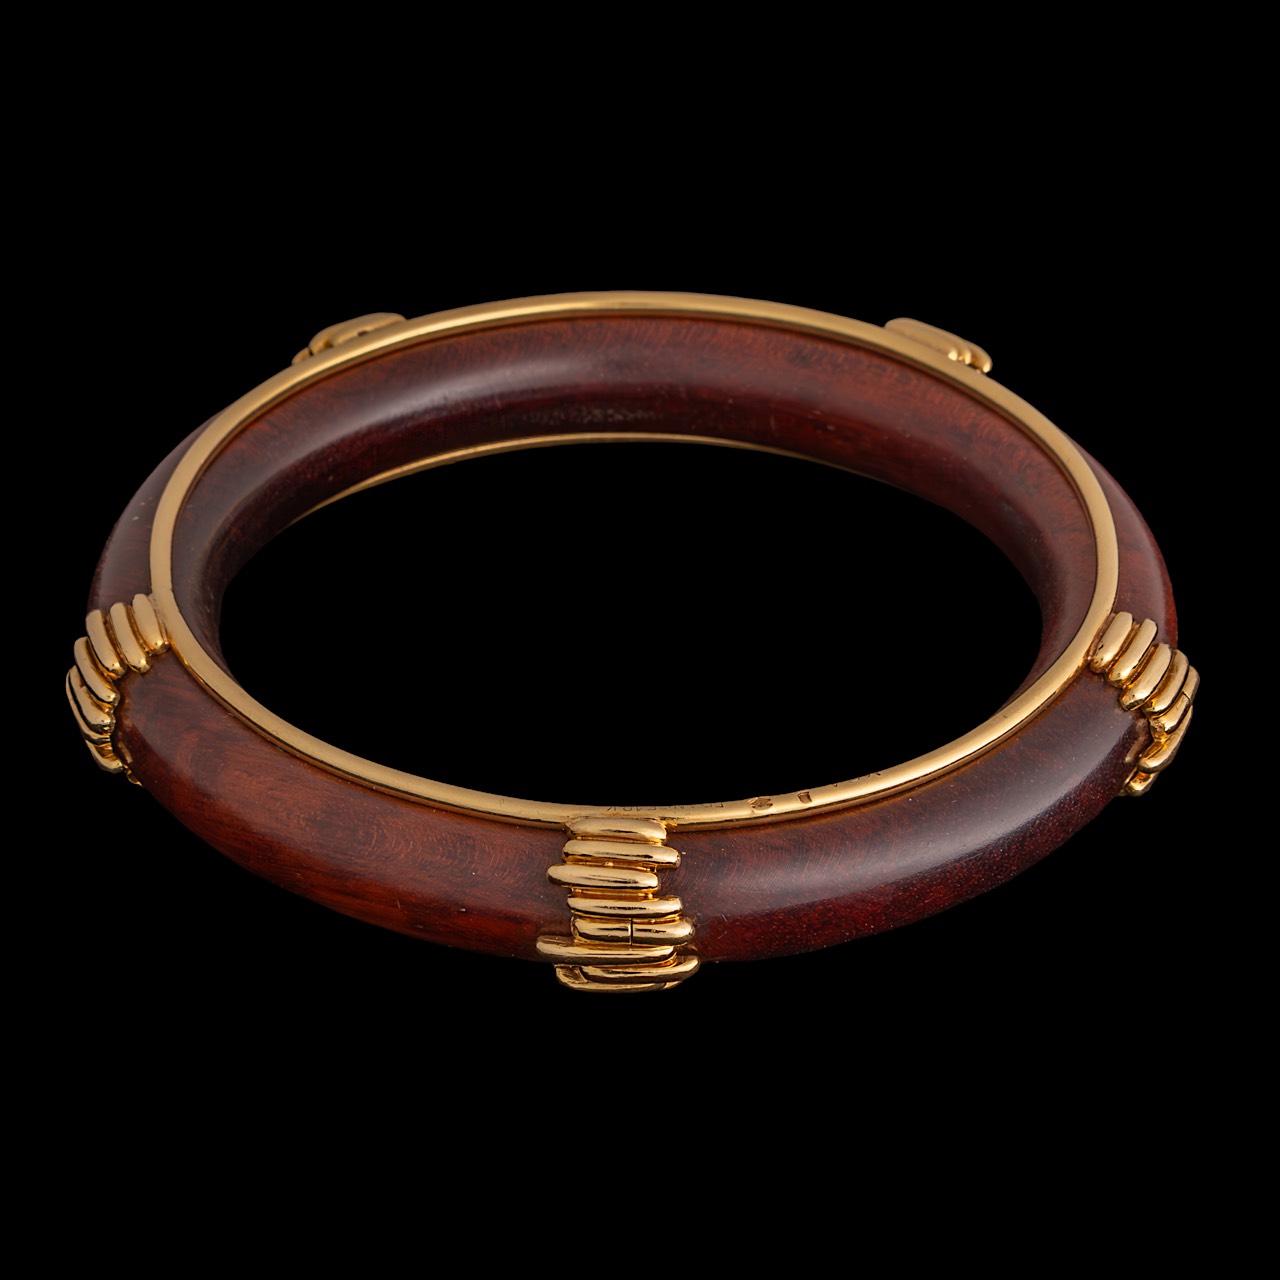 Van Cleef & Arpels, a wood and gold bangle bracelet, 18ct gold, signed VCA, Inner circumference 20 c - Image 4 of 7